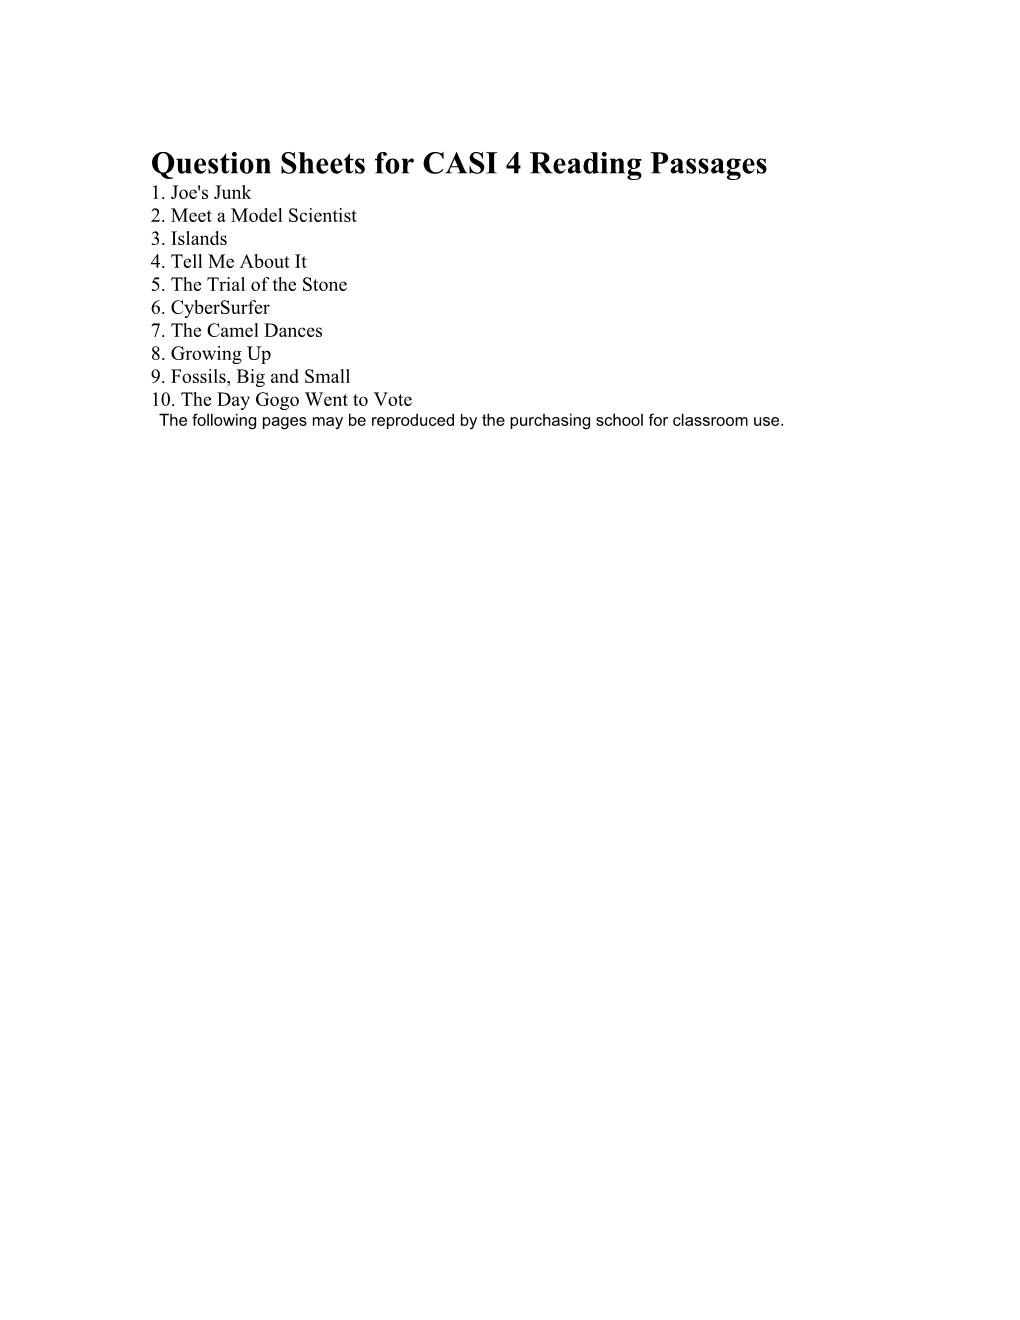 Question Sheets for CASI 4 Reading Passages